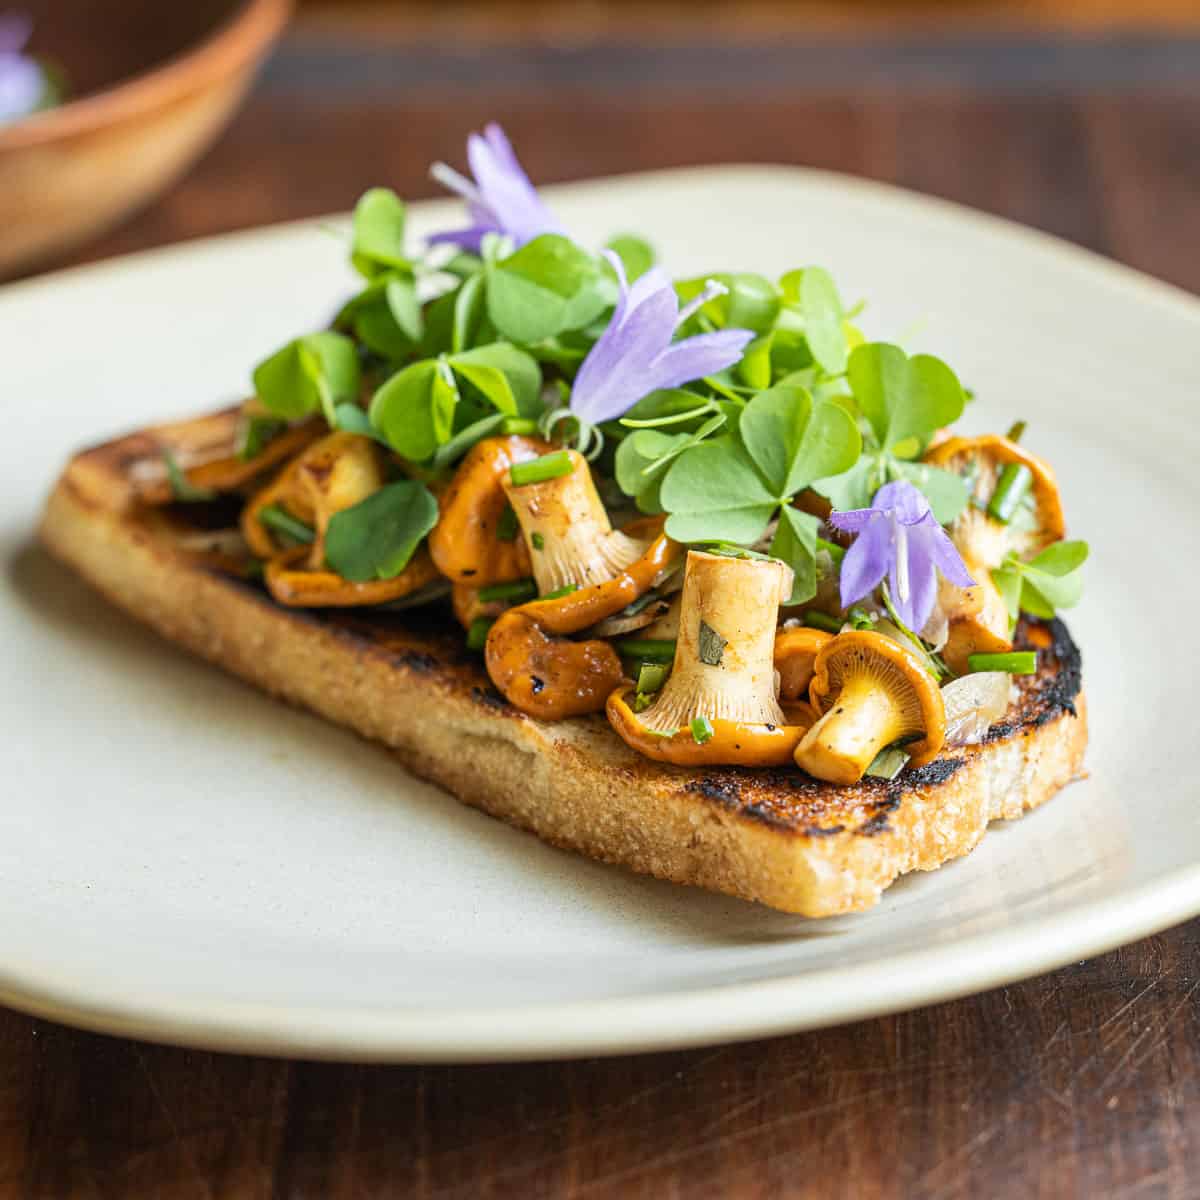 A piece of grilled bread topped with chanterelles, shallots, herbs and wood sorrel. 